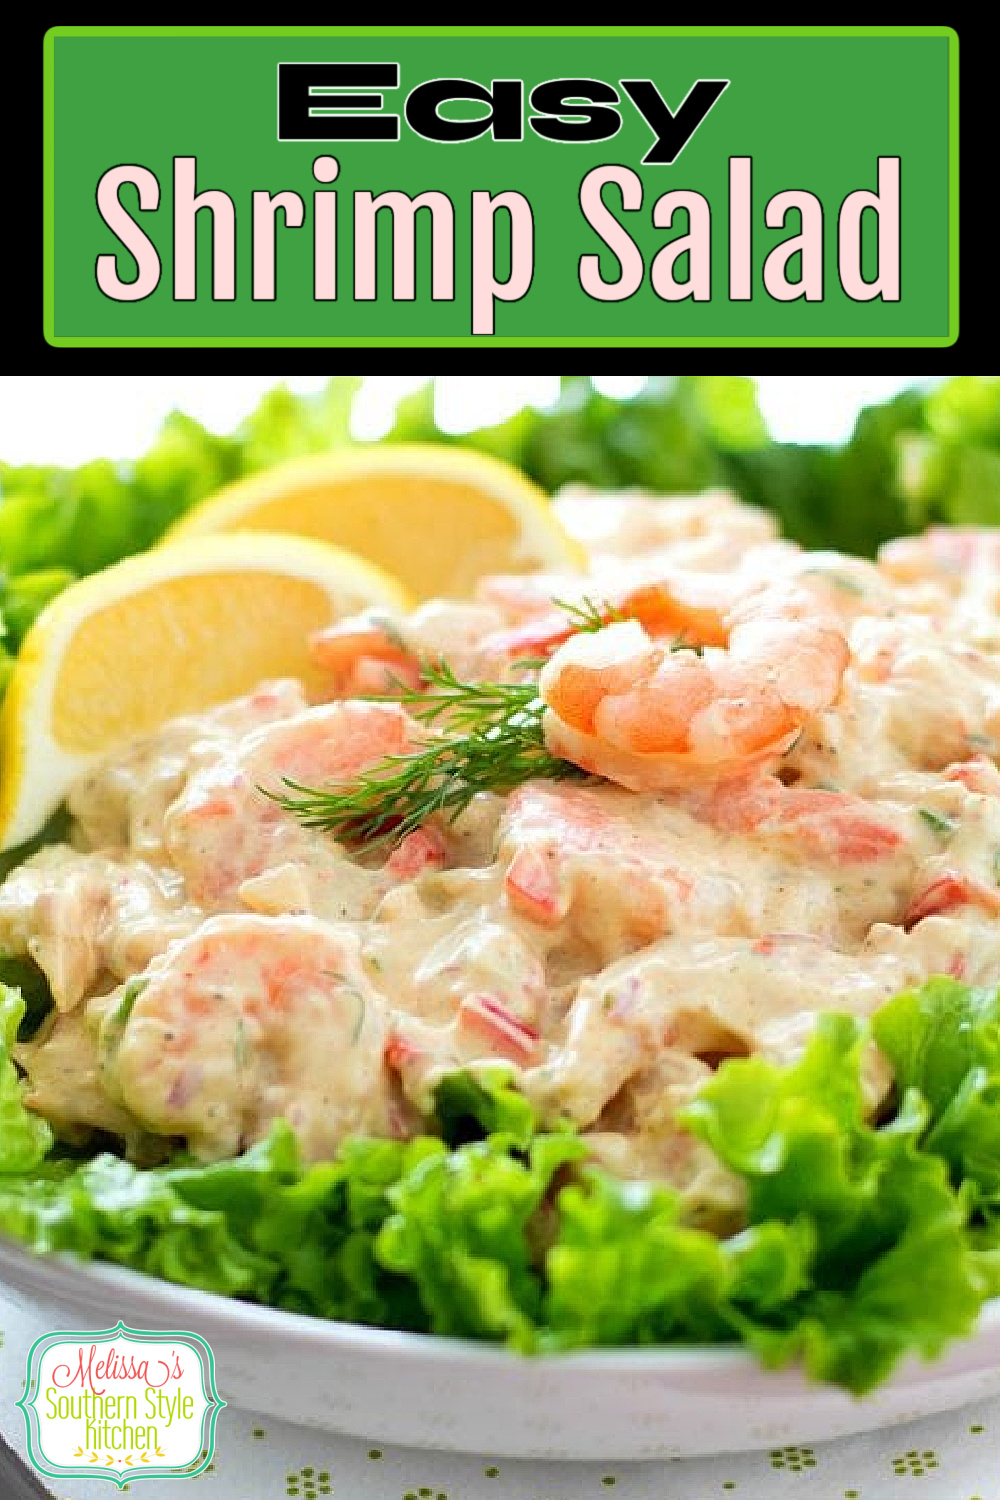 Seafood fans will flip for this kickin' Shrimp Salad #shrimp #shrimpsalad #shrimprecikpes #salads #picnicfood #appetizer #seafood #dinnerideas #partyfood #easyrecipes #southernfood #southernrecipes via @melissasssk